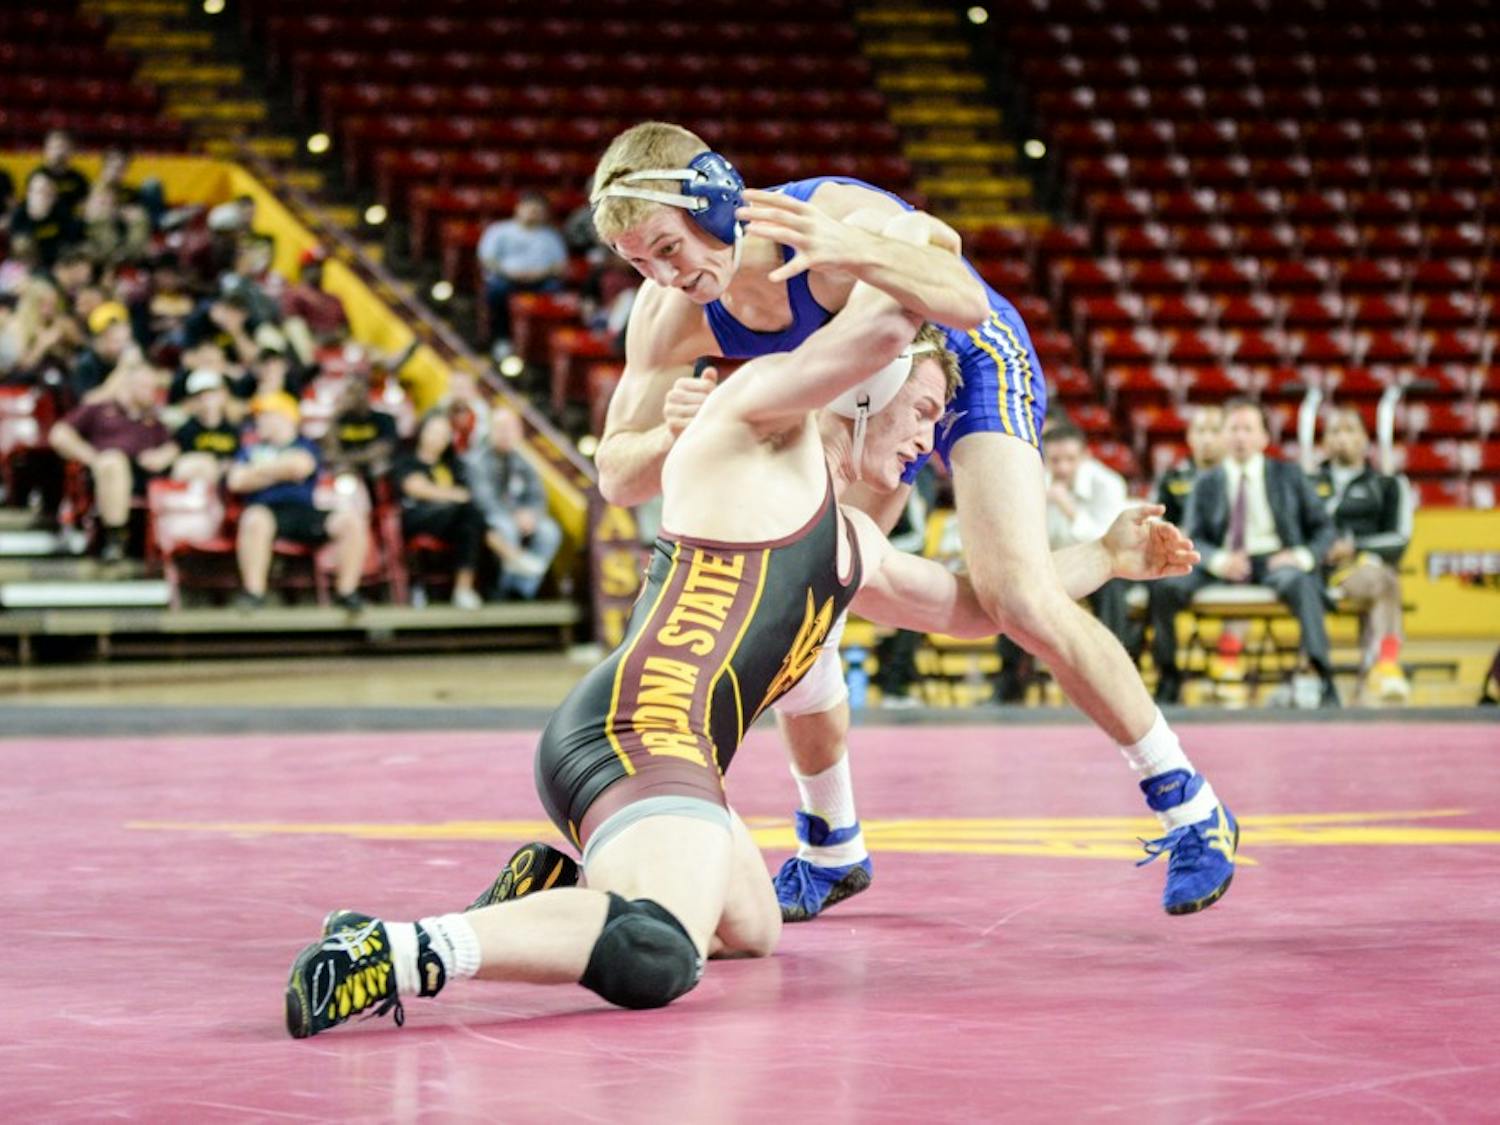 ASU sophomore Oliver Pierce sweeps the leg of CSU Bakersfield's Spencer Hill in their matchup on Sunday, Jan. 18, 2015, at Wells Fargo Arena in Tempe. Pierce won the match 5 – 4. The Sun Devils went on to win against the Roadrunners 31 – 6. (J. Bauer-Leffler/The State Press)